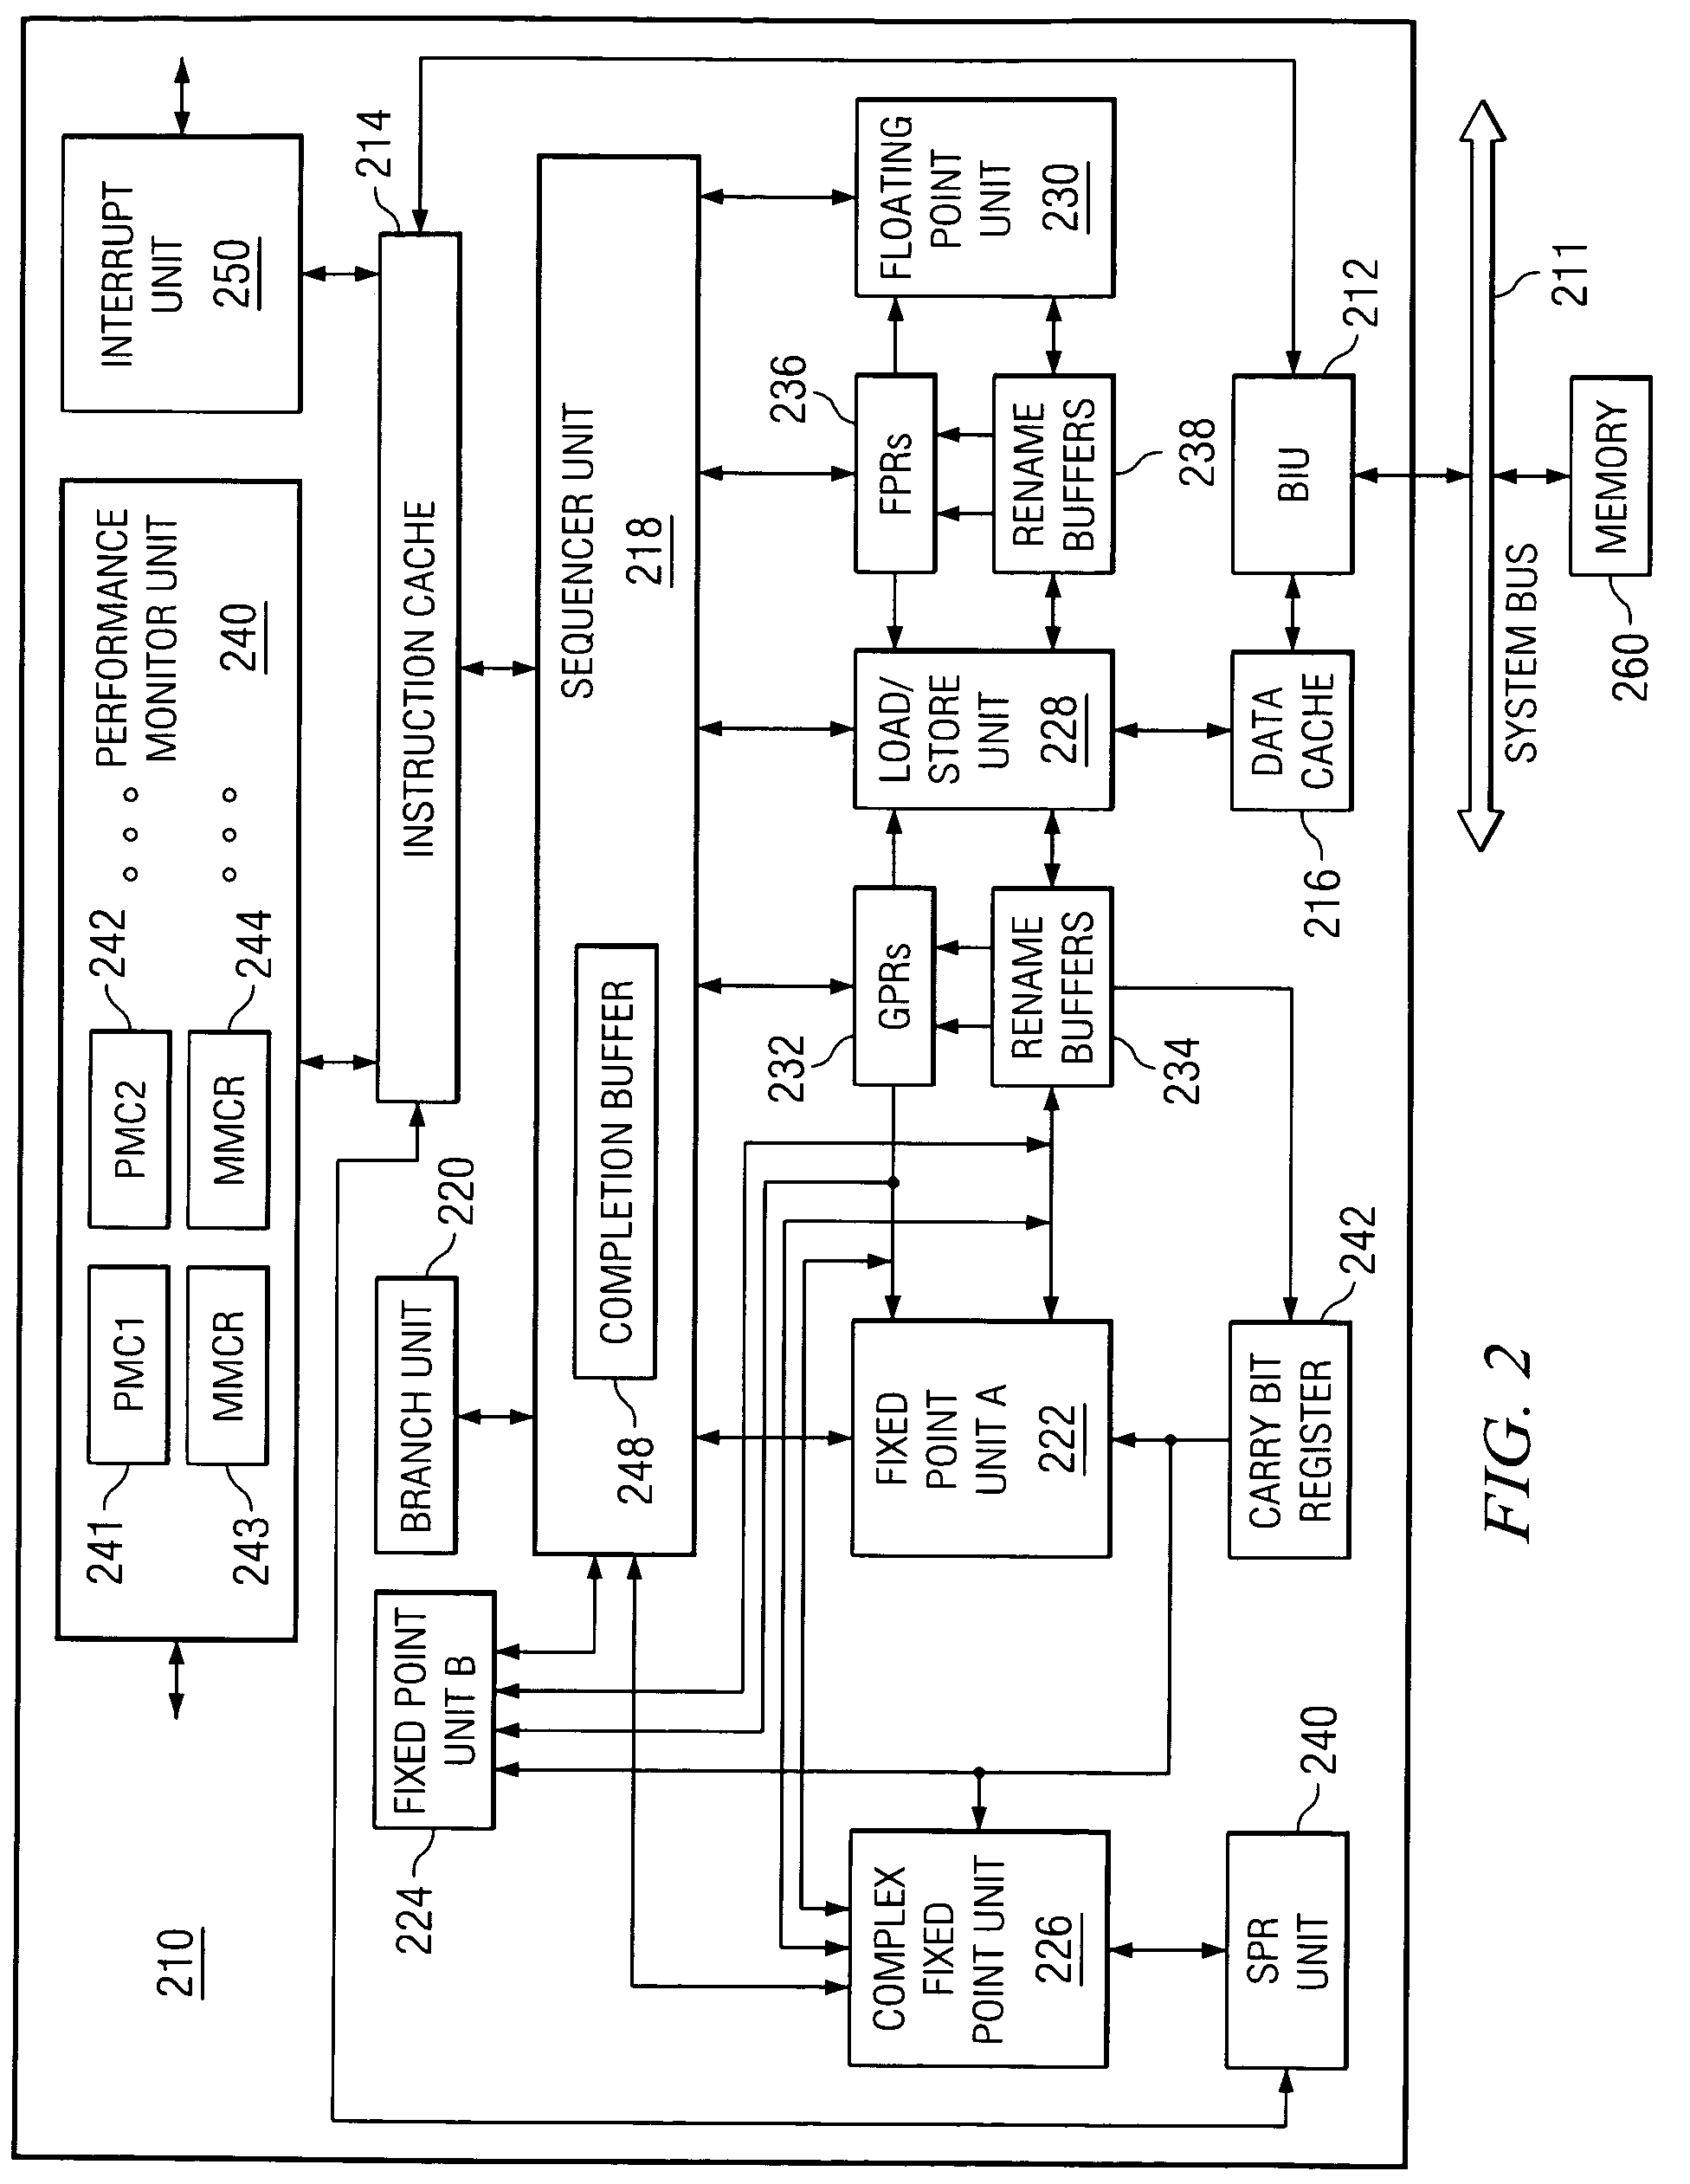 Method and apparatus for providing hardware assistance for code coverage